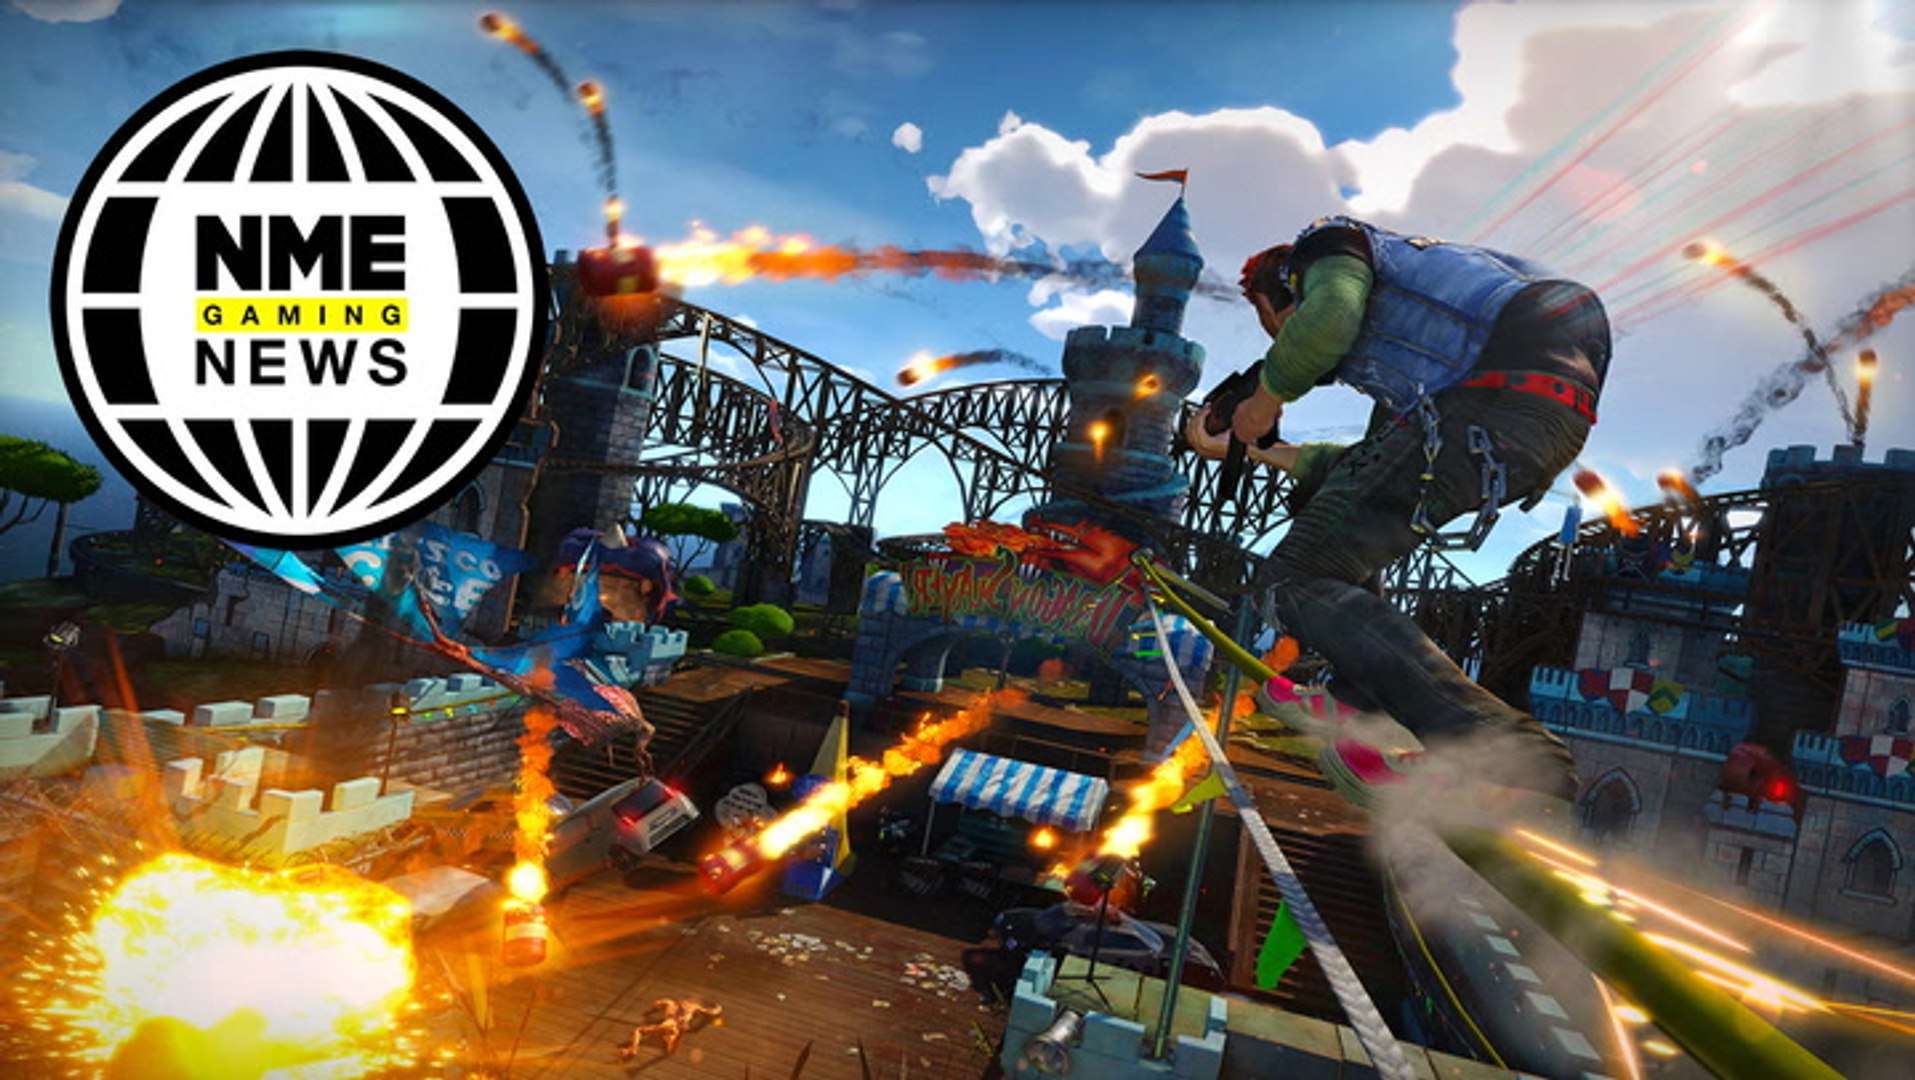 Some Sunset Overdrive Screens From Gamescom